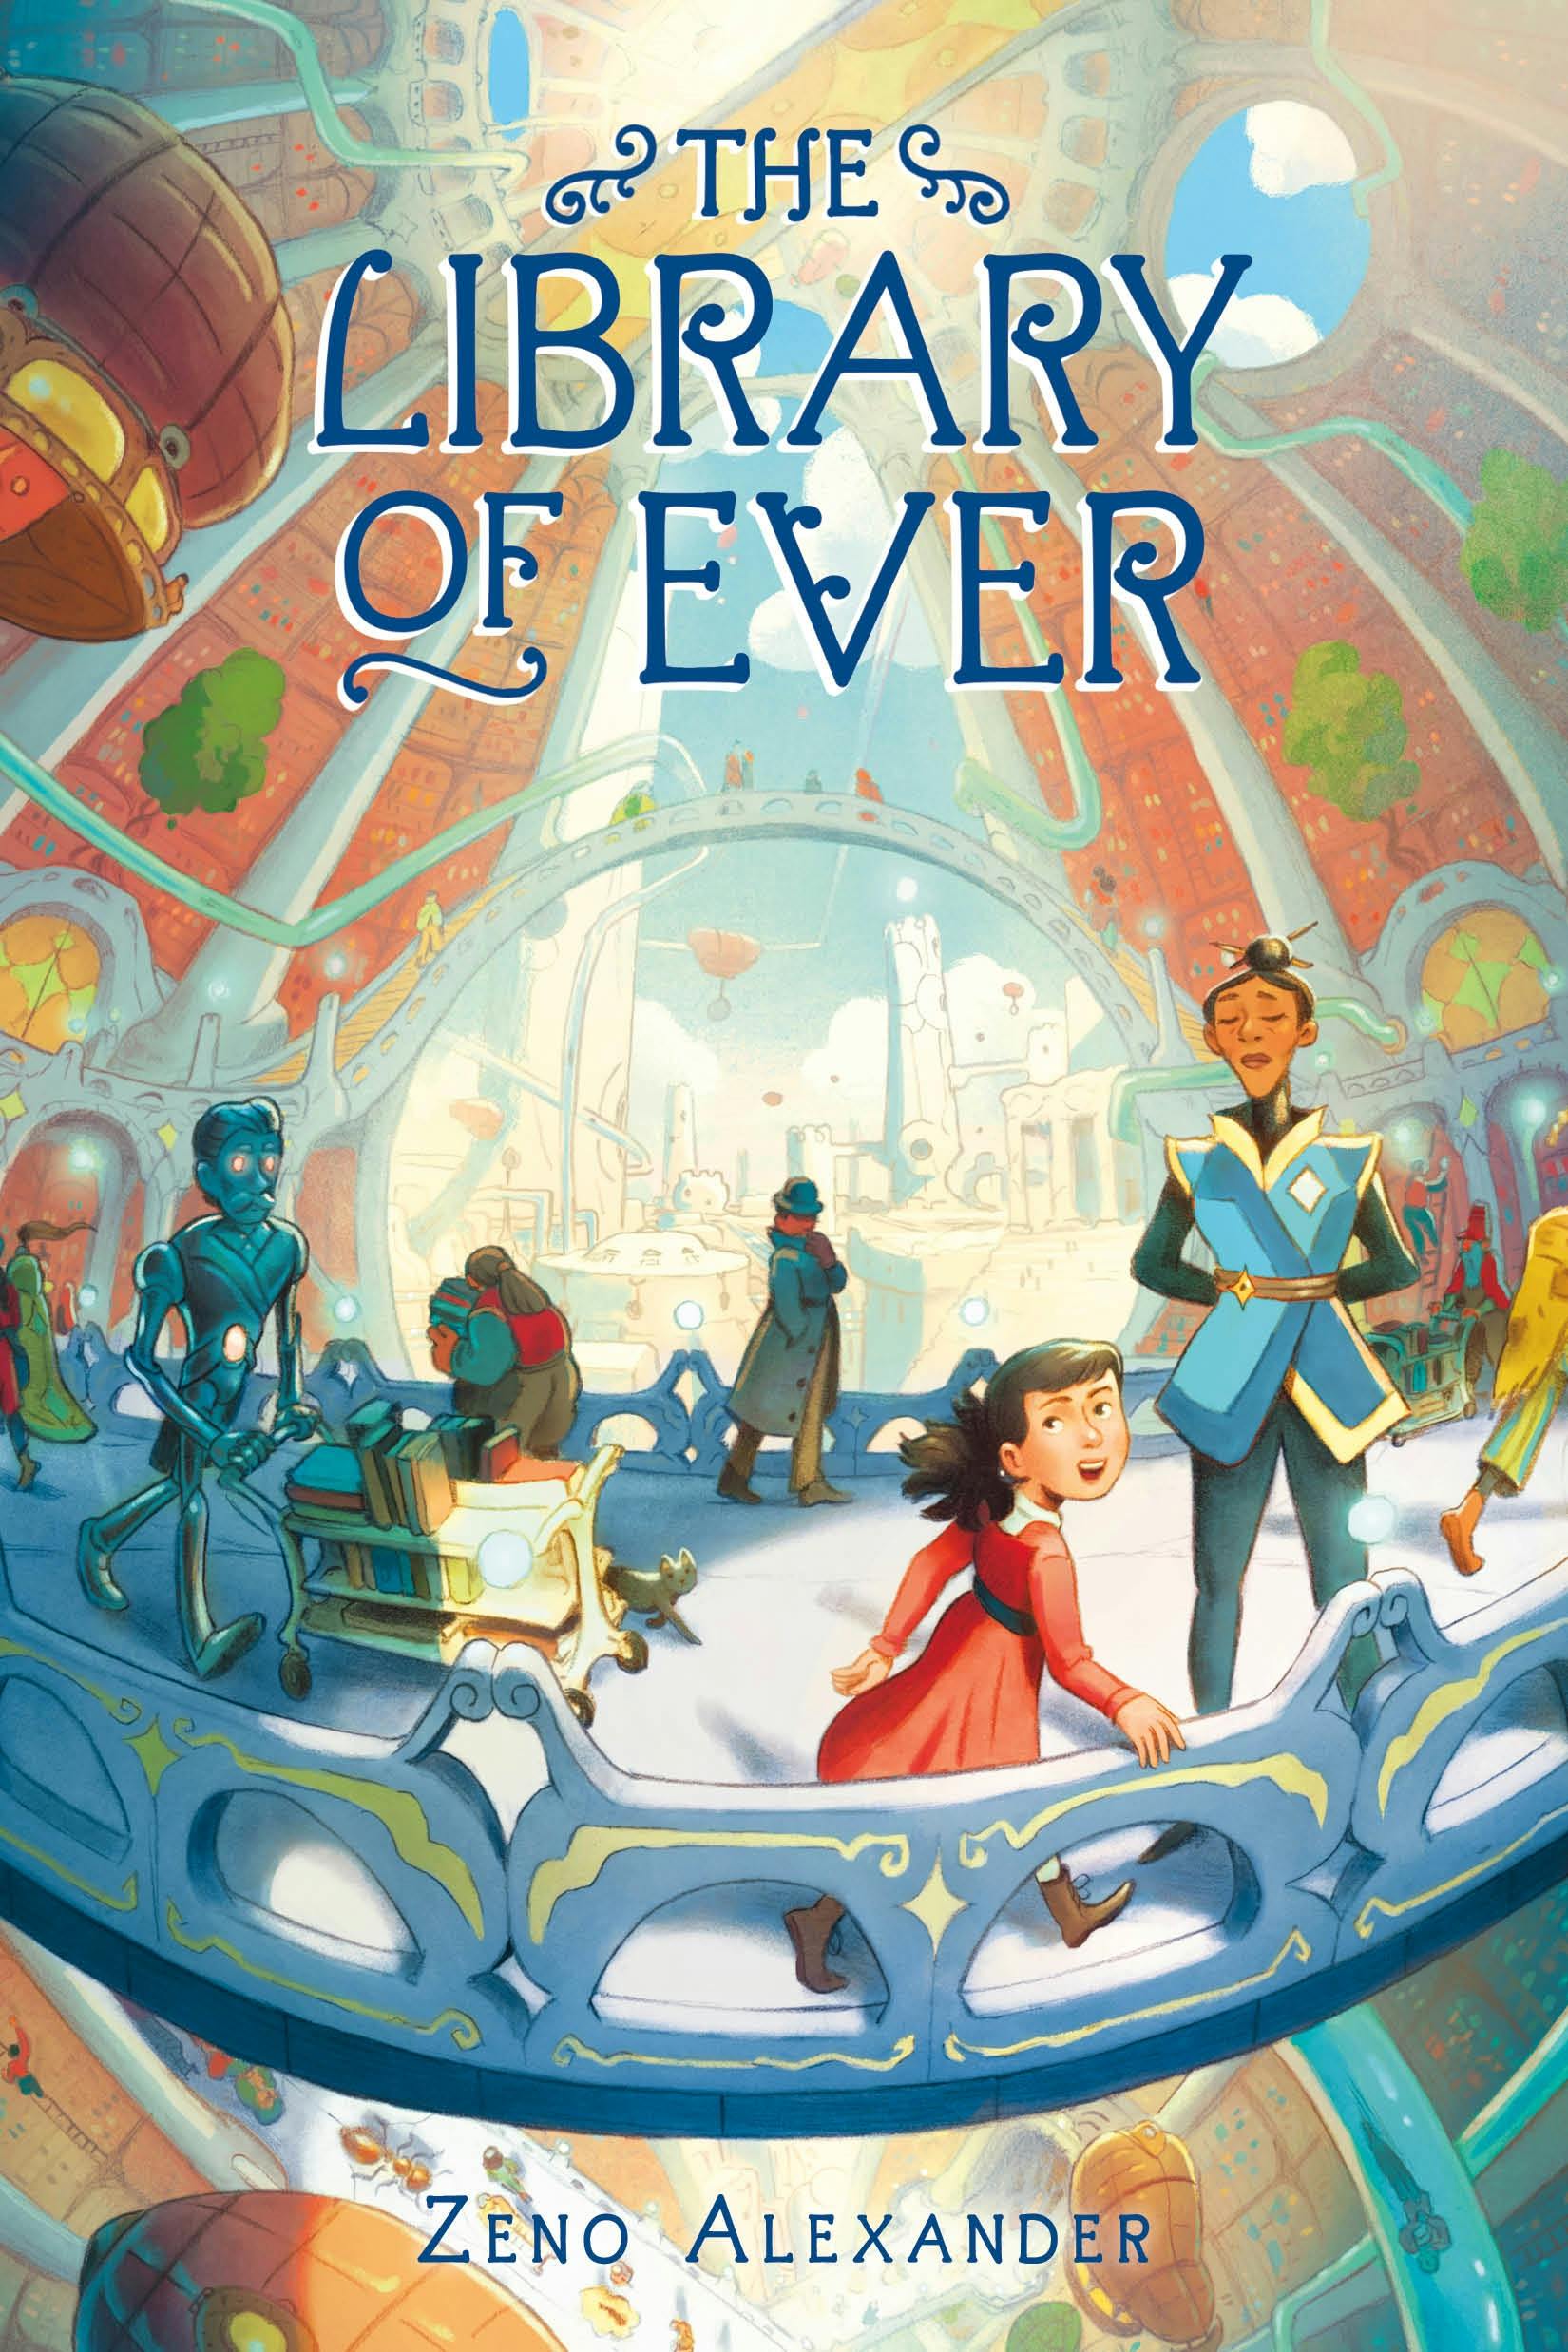 Coliseum Boulevard Branch Library - Starting next Tuesday, Mrs. Kelly will  be reading The Library of Ever by Zeno Alexander. Each week she will read  two chapters and give you a STE(A)M